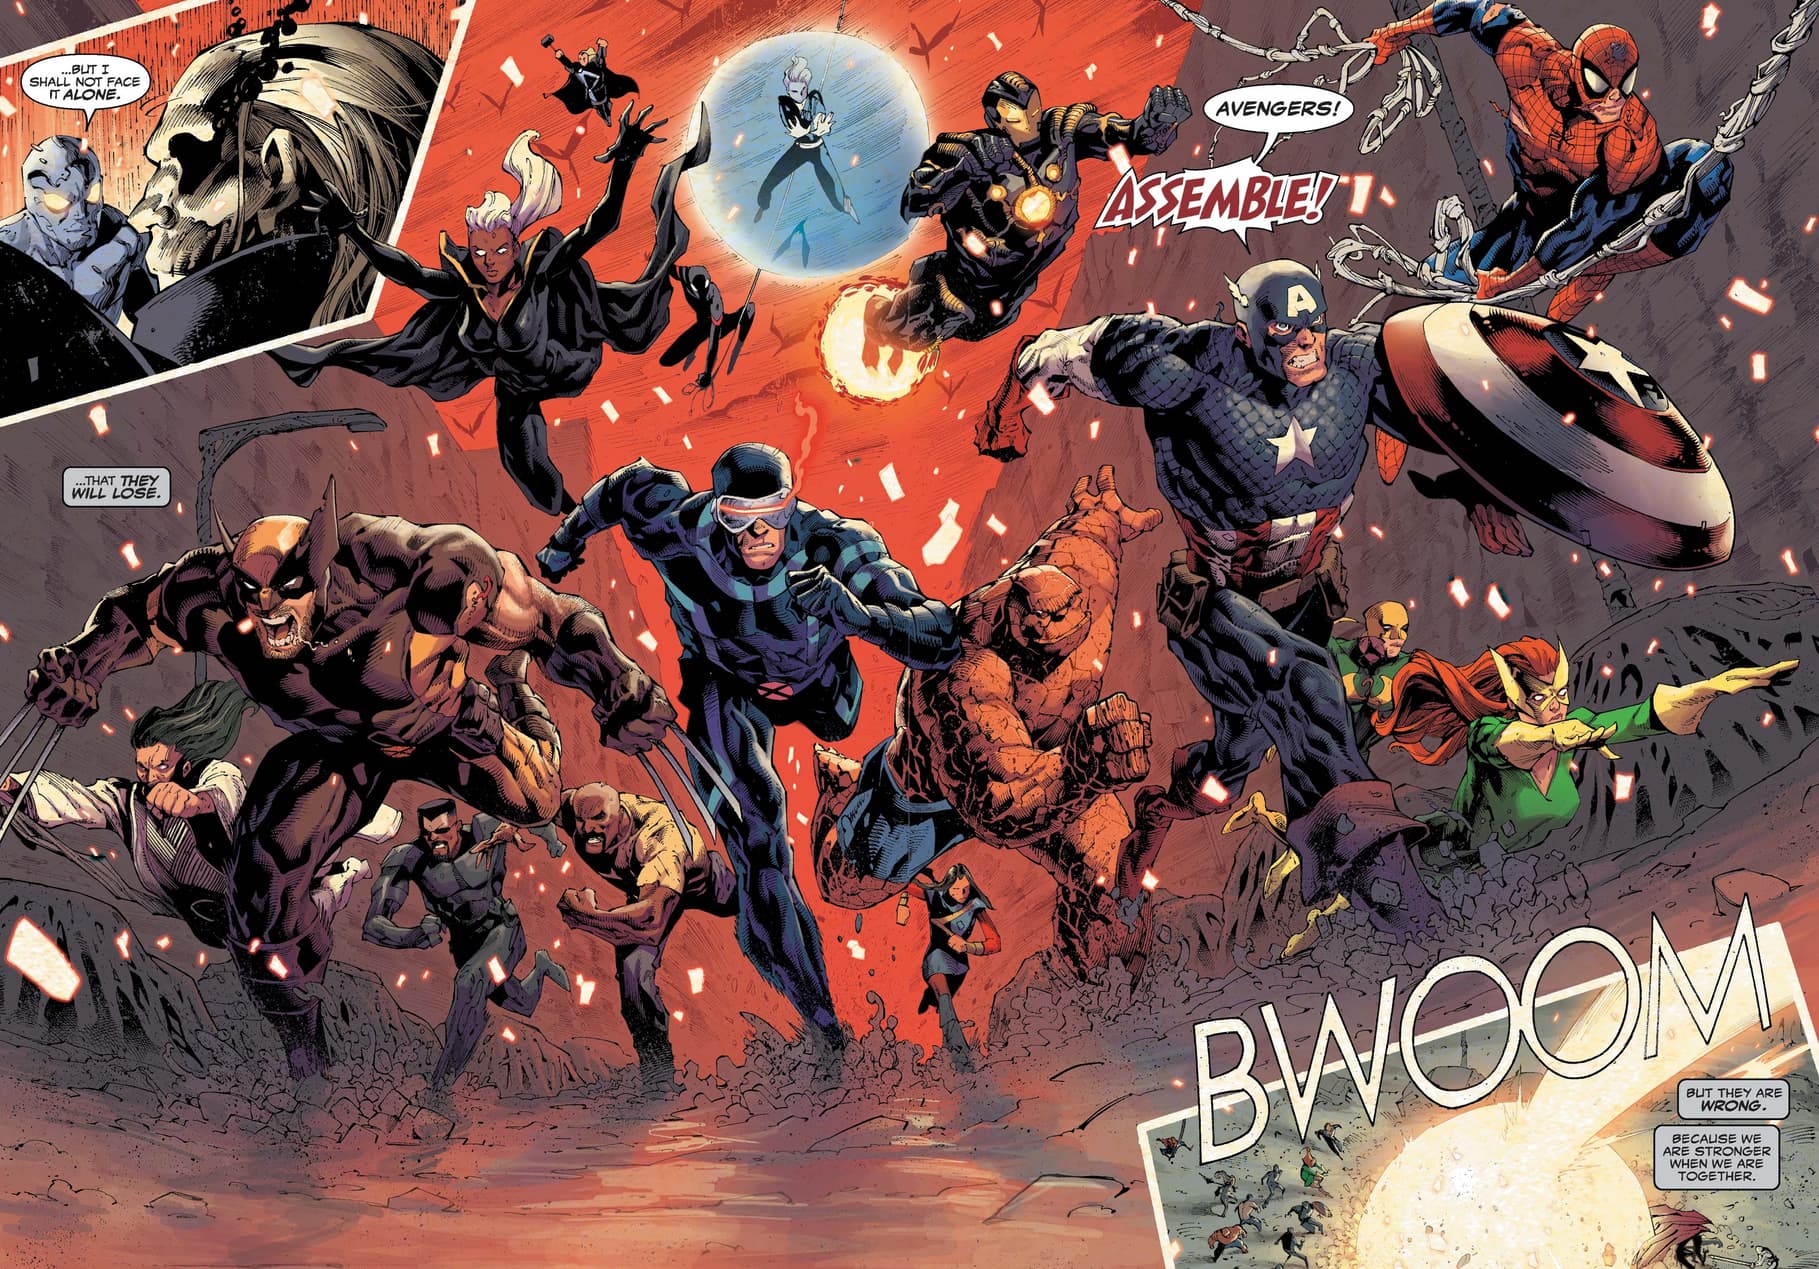 Avengers and X-Men face Knull head-on.